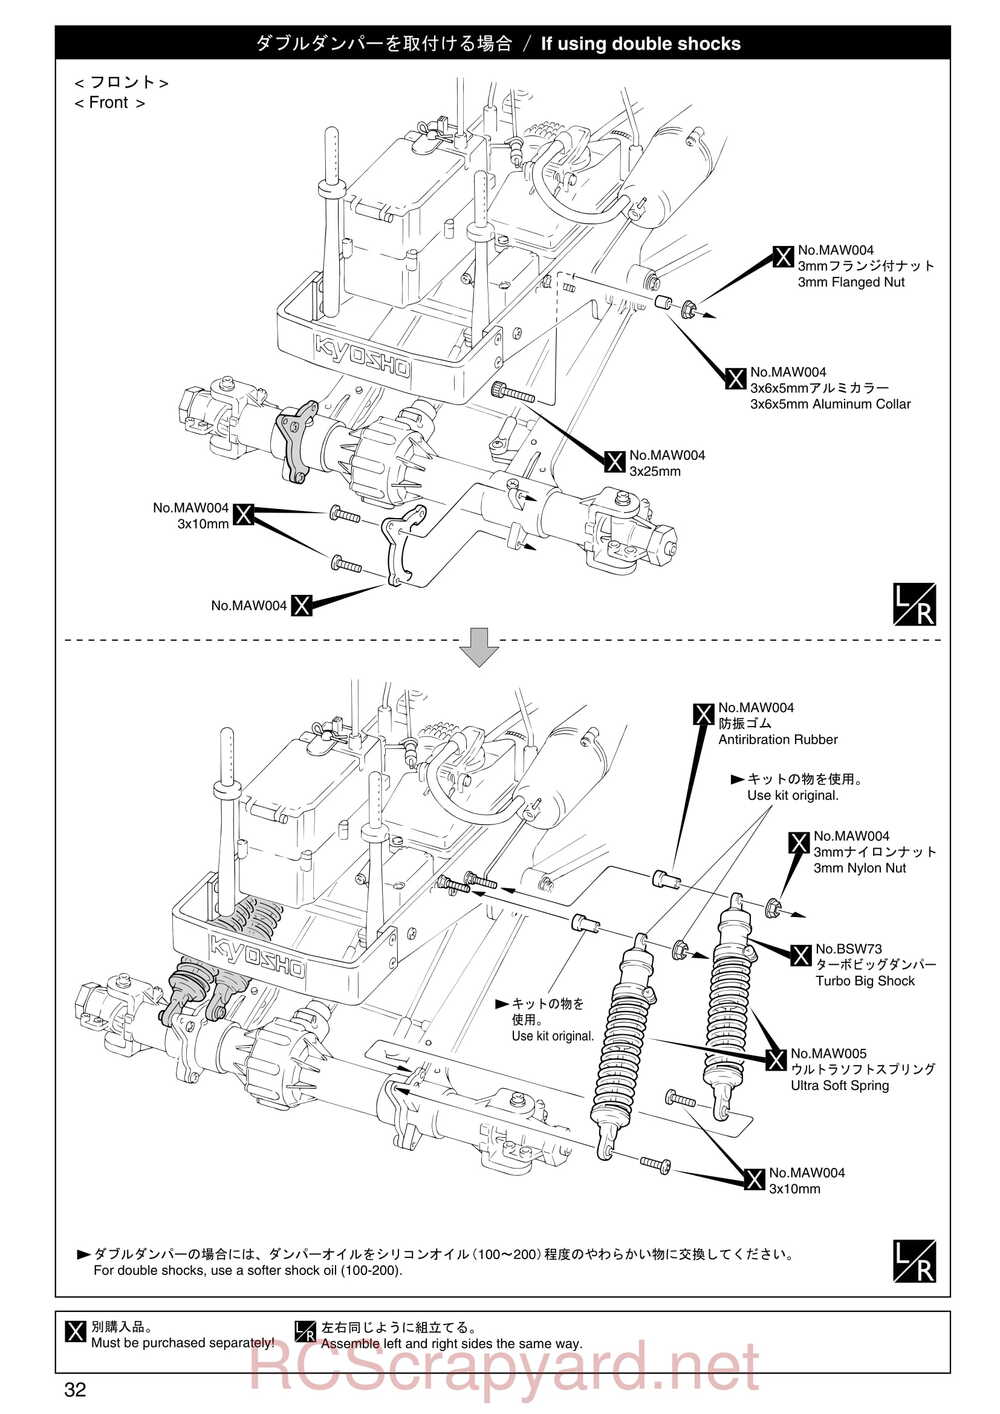 Kyosho - 31224 - Mad-Armour - Manual - Page 32